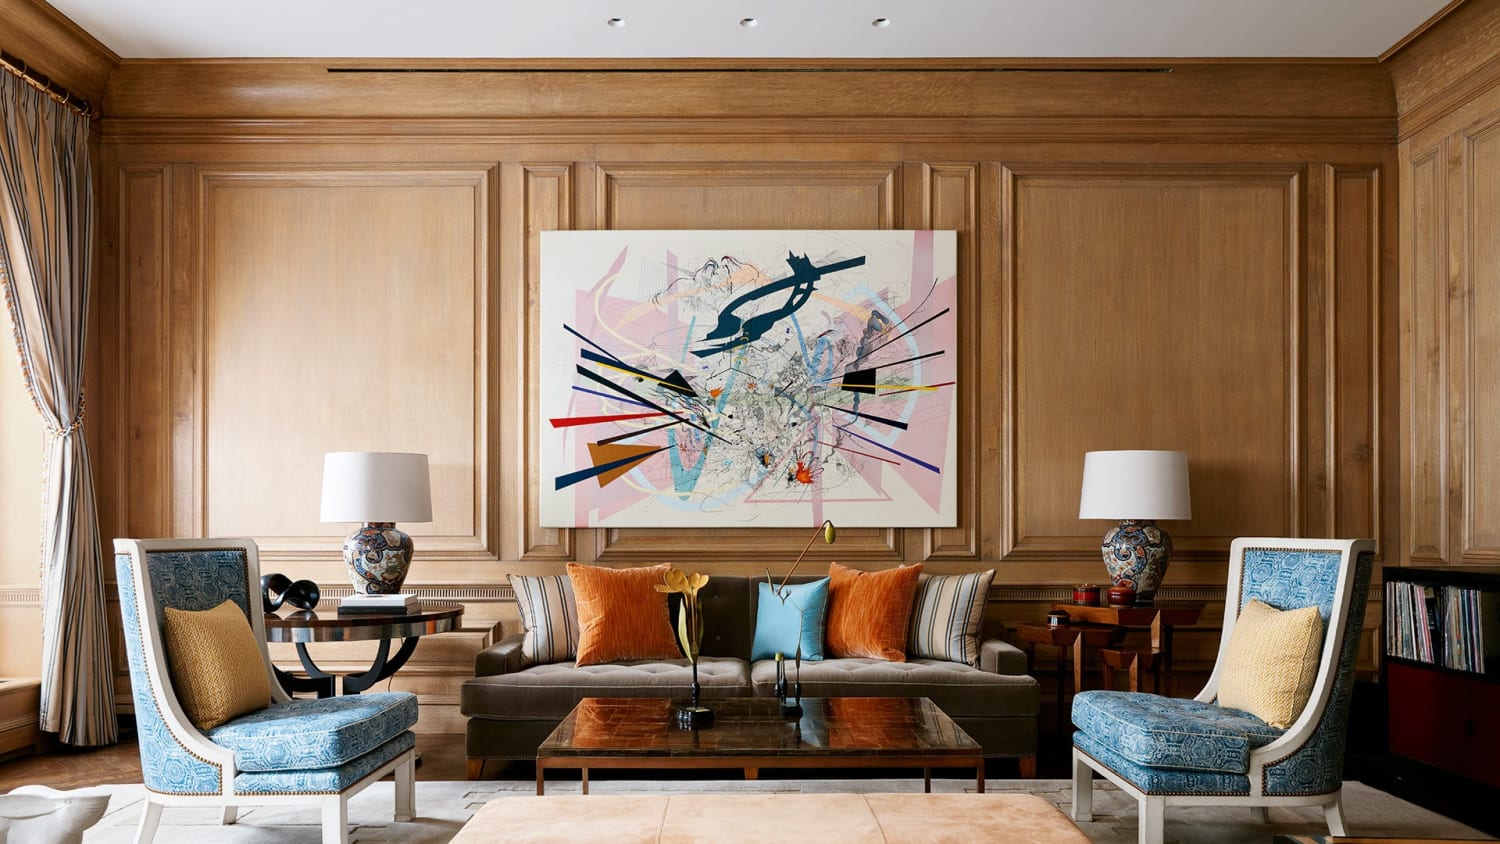 A vivid new look for a storied Manhattan townhouse